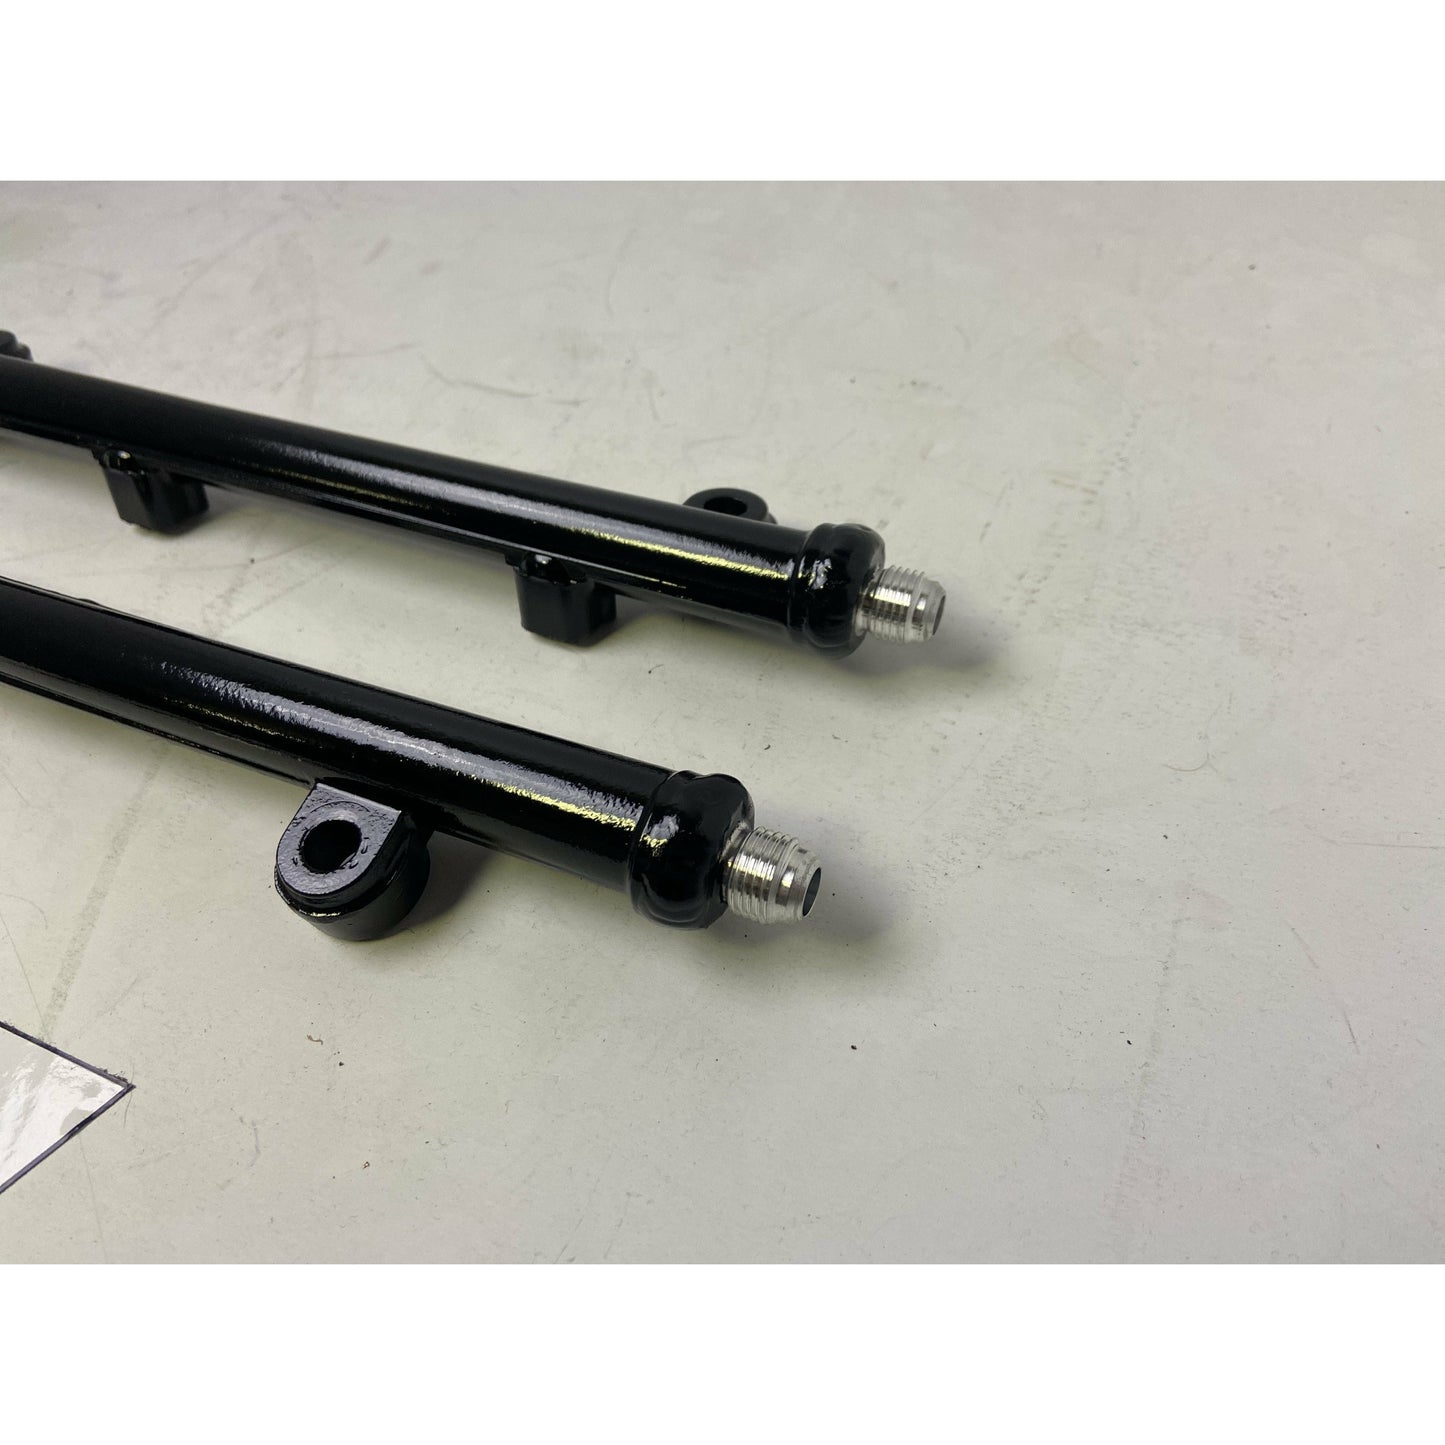 IMR 3000GT Upgraded Fuel Rails  (-AN/-AN, Front and Rear Rails)